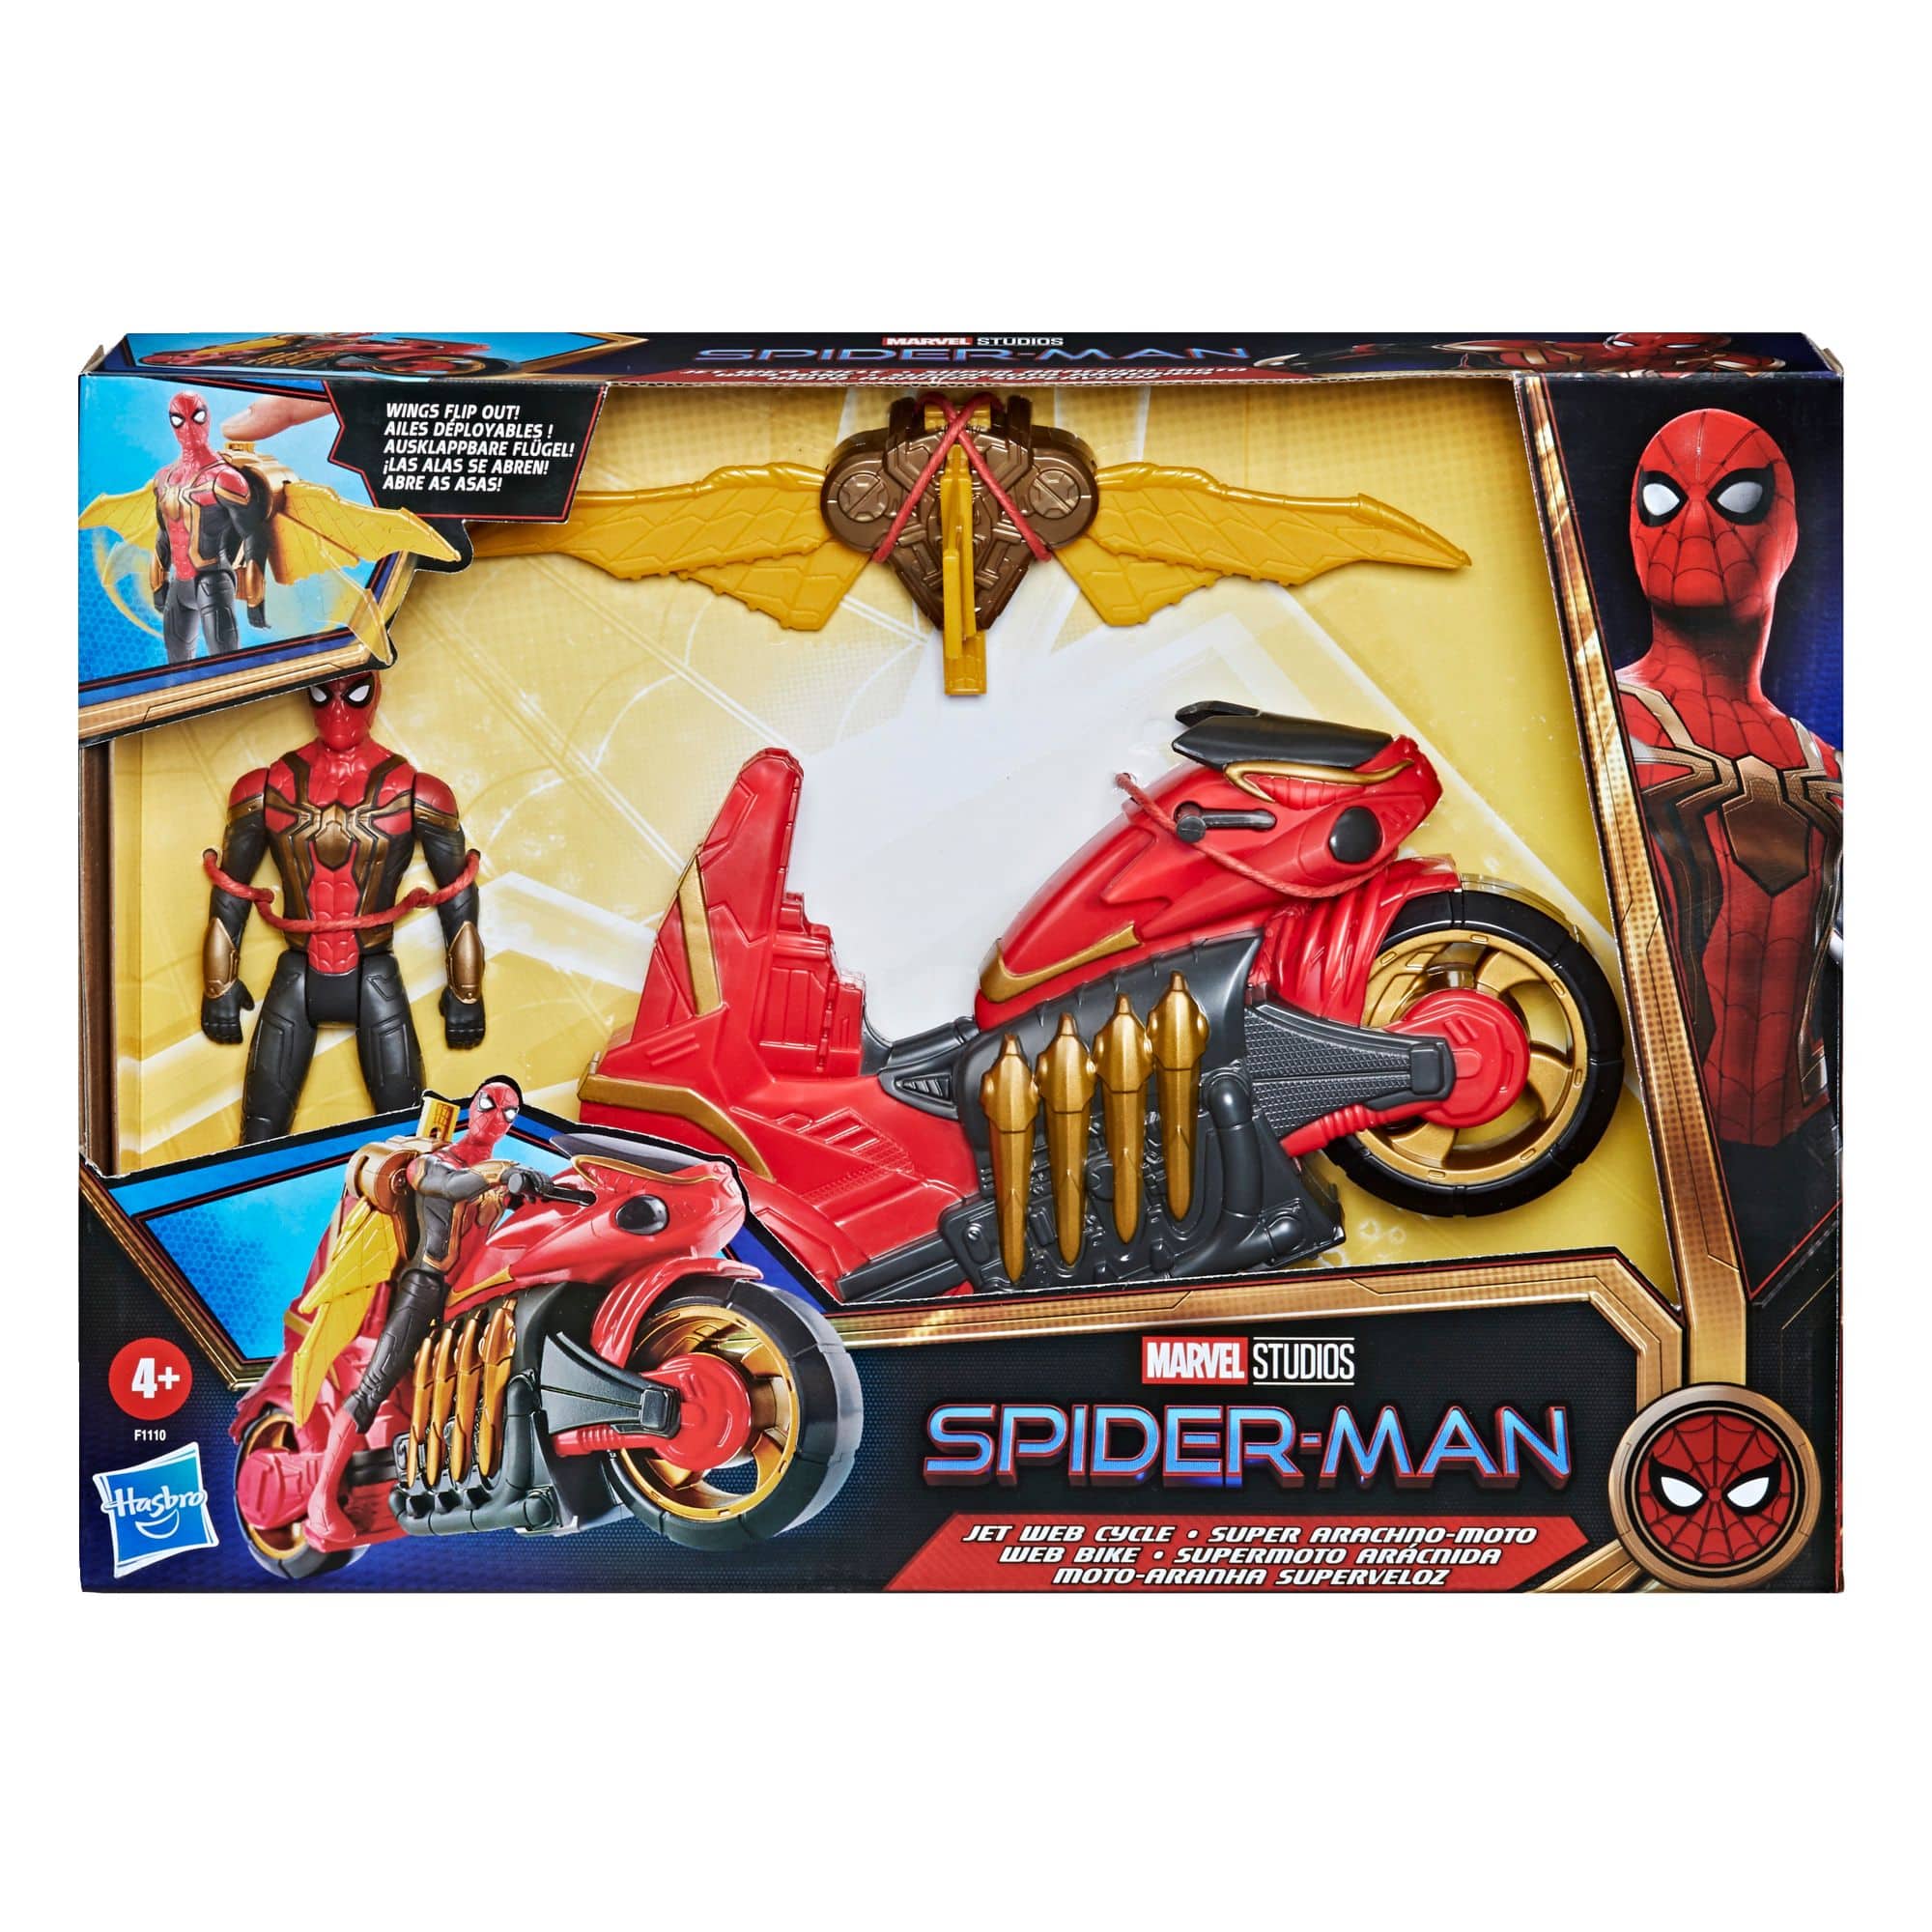 Spider-Man Marvel Jet Web Cycle Vehicle & Action Figured Toy with